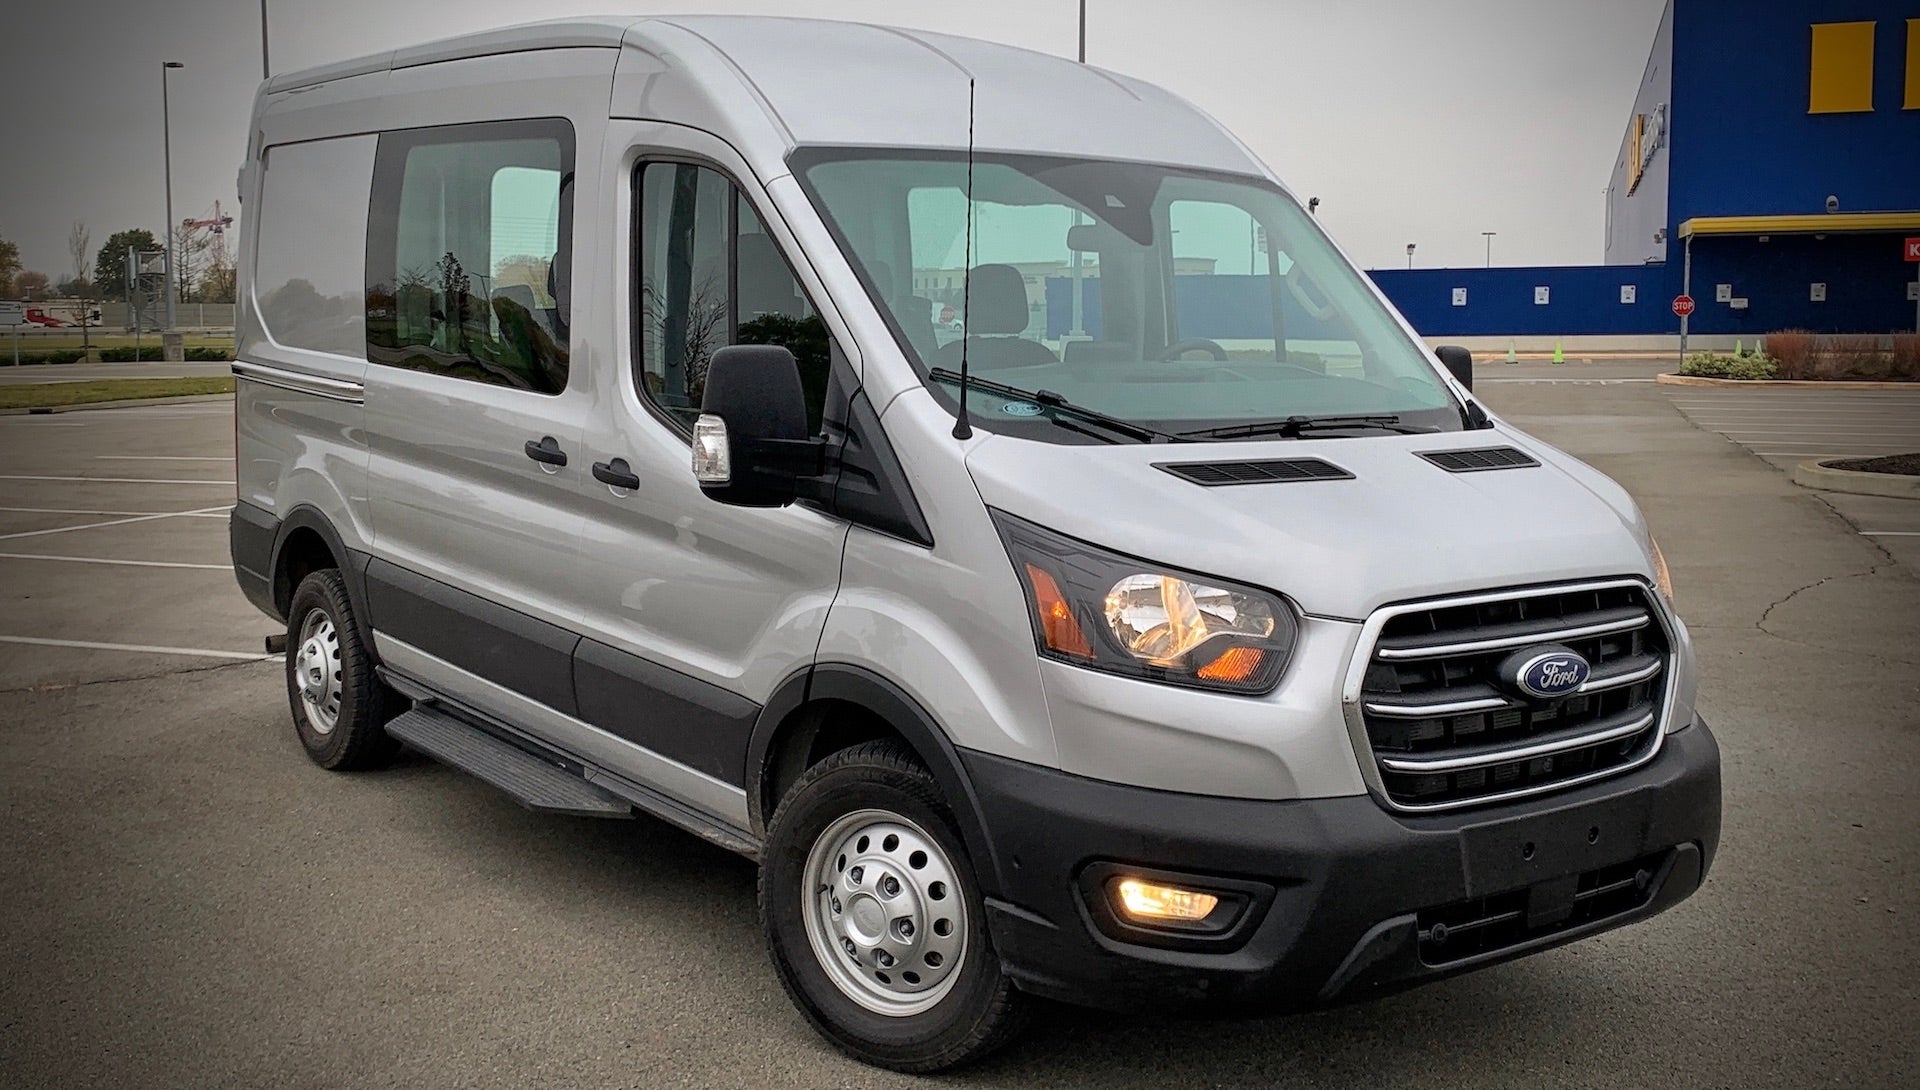 2020 Ford Transit The SUV Alternative Didn't You Wanted